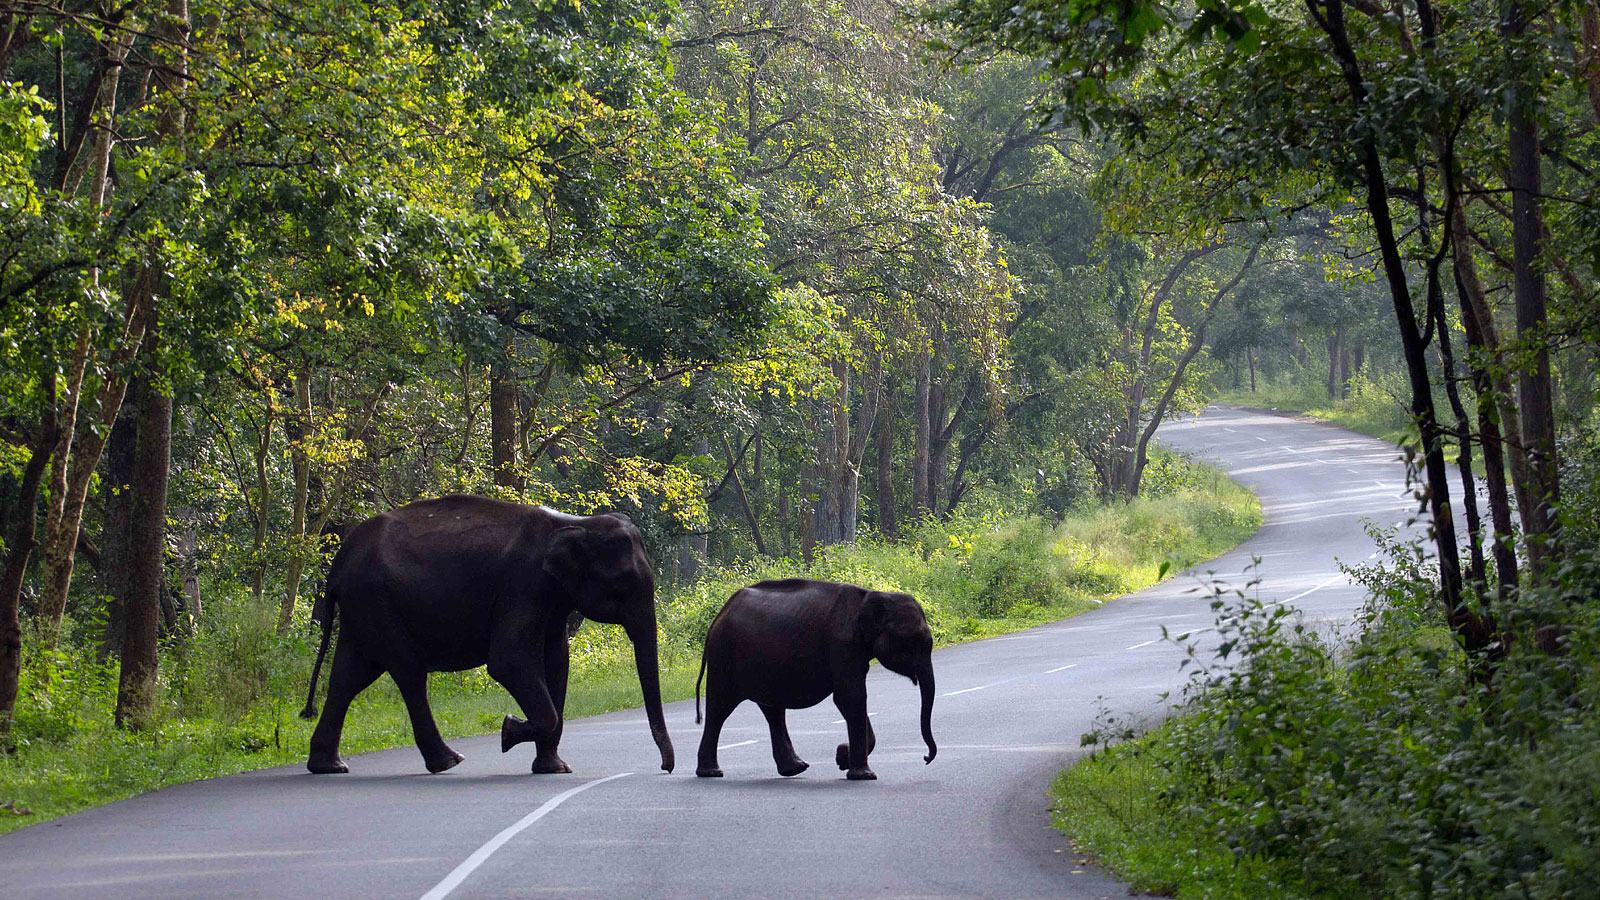 wayanad tour packages for 2 days from chennai